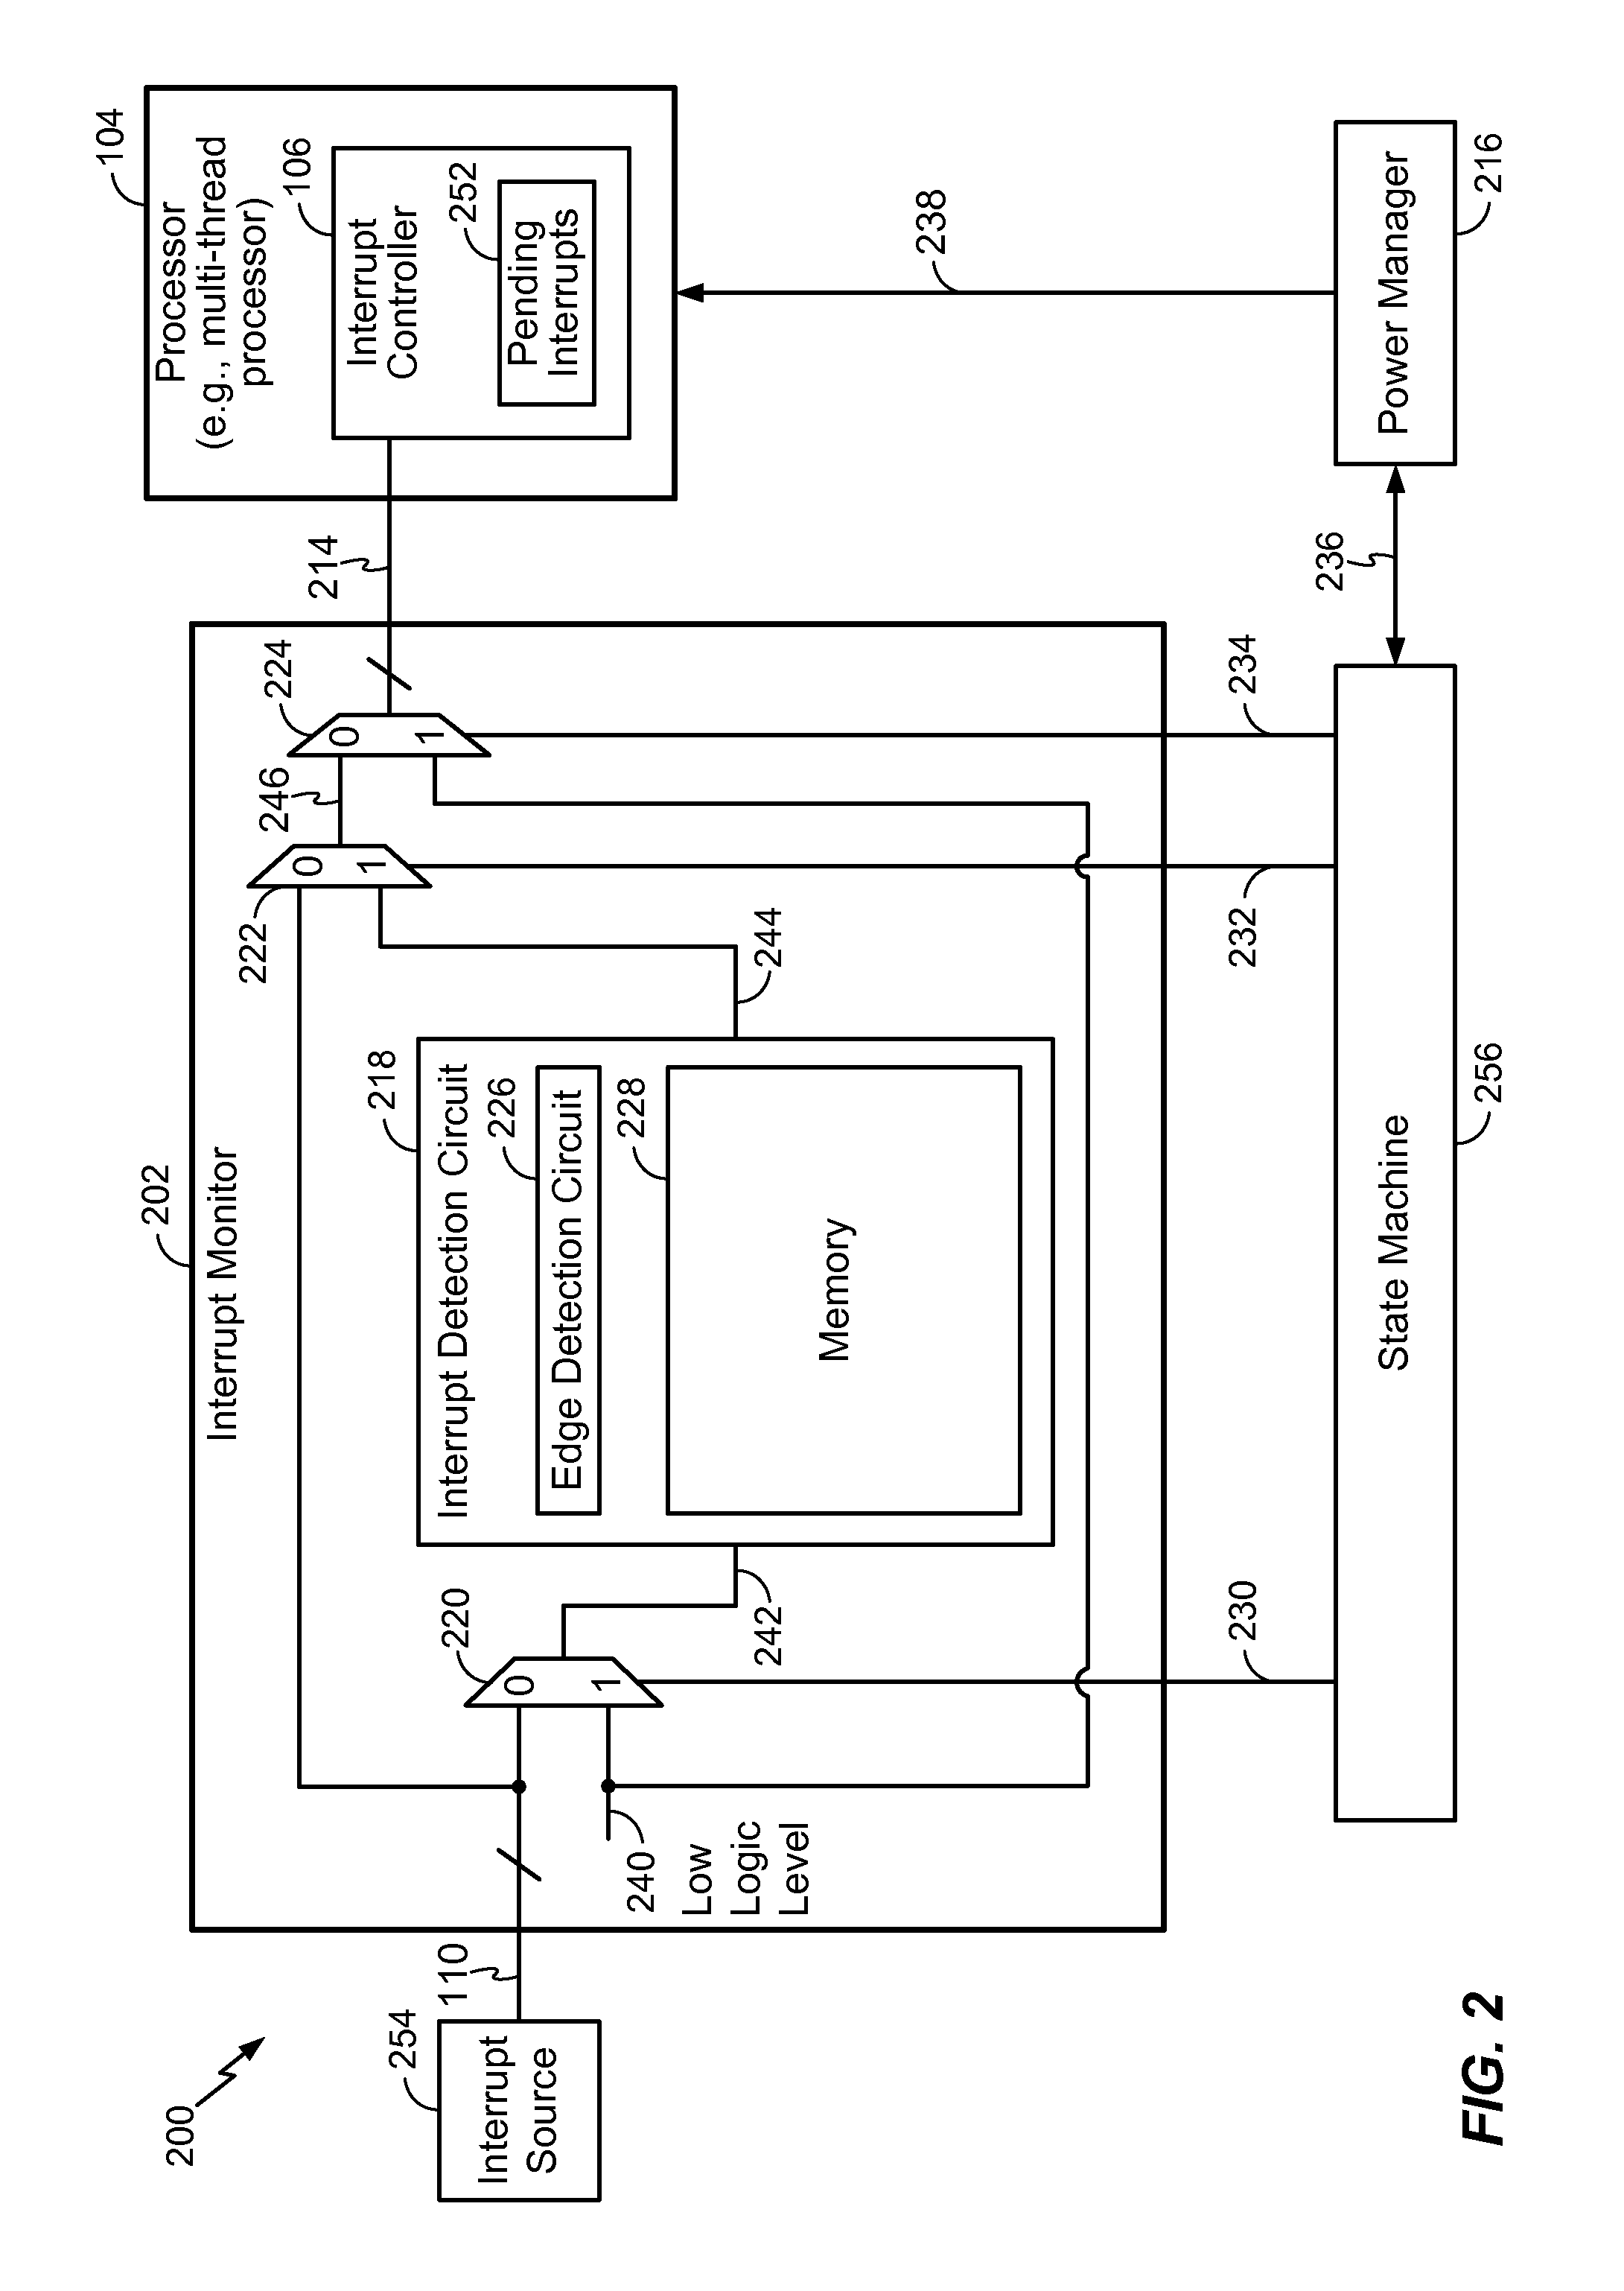 Method and Apparatus for Monitoring Interrupts During a Power Down Event at a Processor